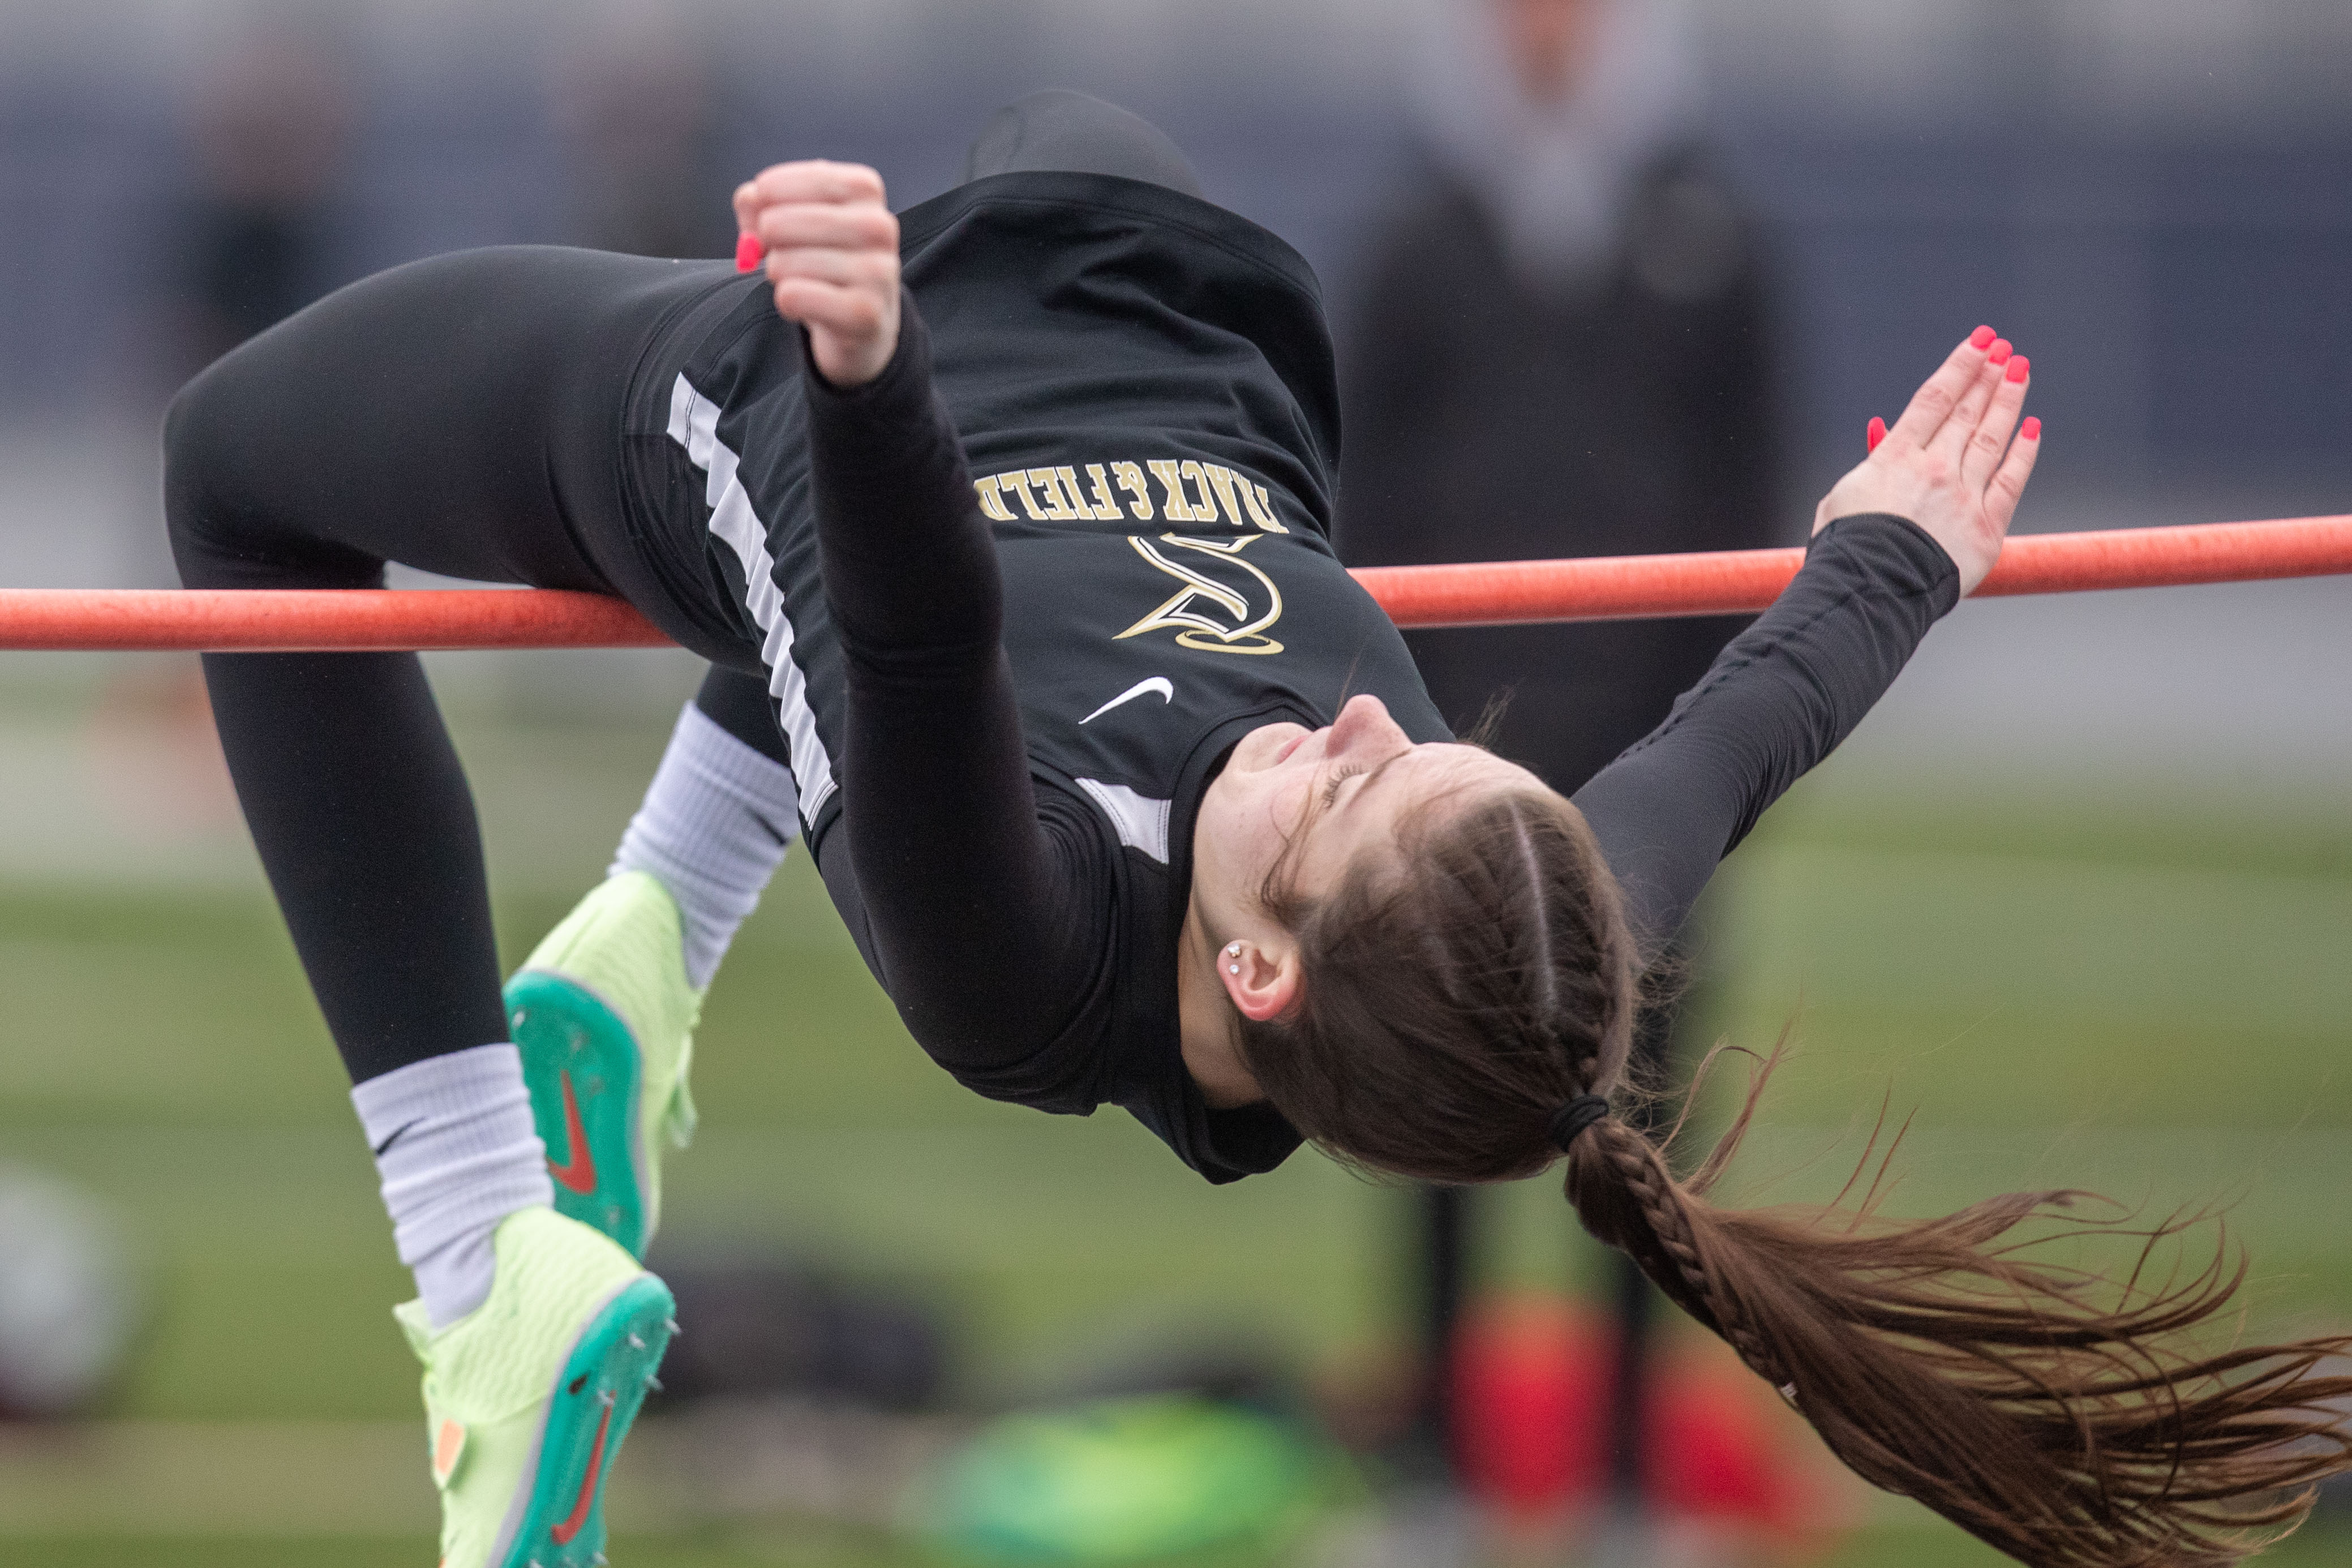 Julia Rosenberger, Berks Catholic, wins the high jump, clearing 5’ at the 2023 Tim Cook Memorial Invitational track & field meet at Chambersburg, Pa., Mar. 25, 2023.Mark Pynes | pennlive.com